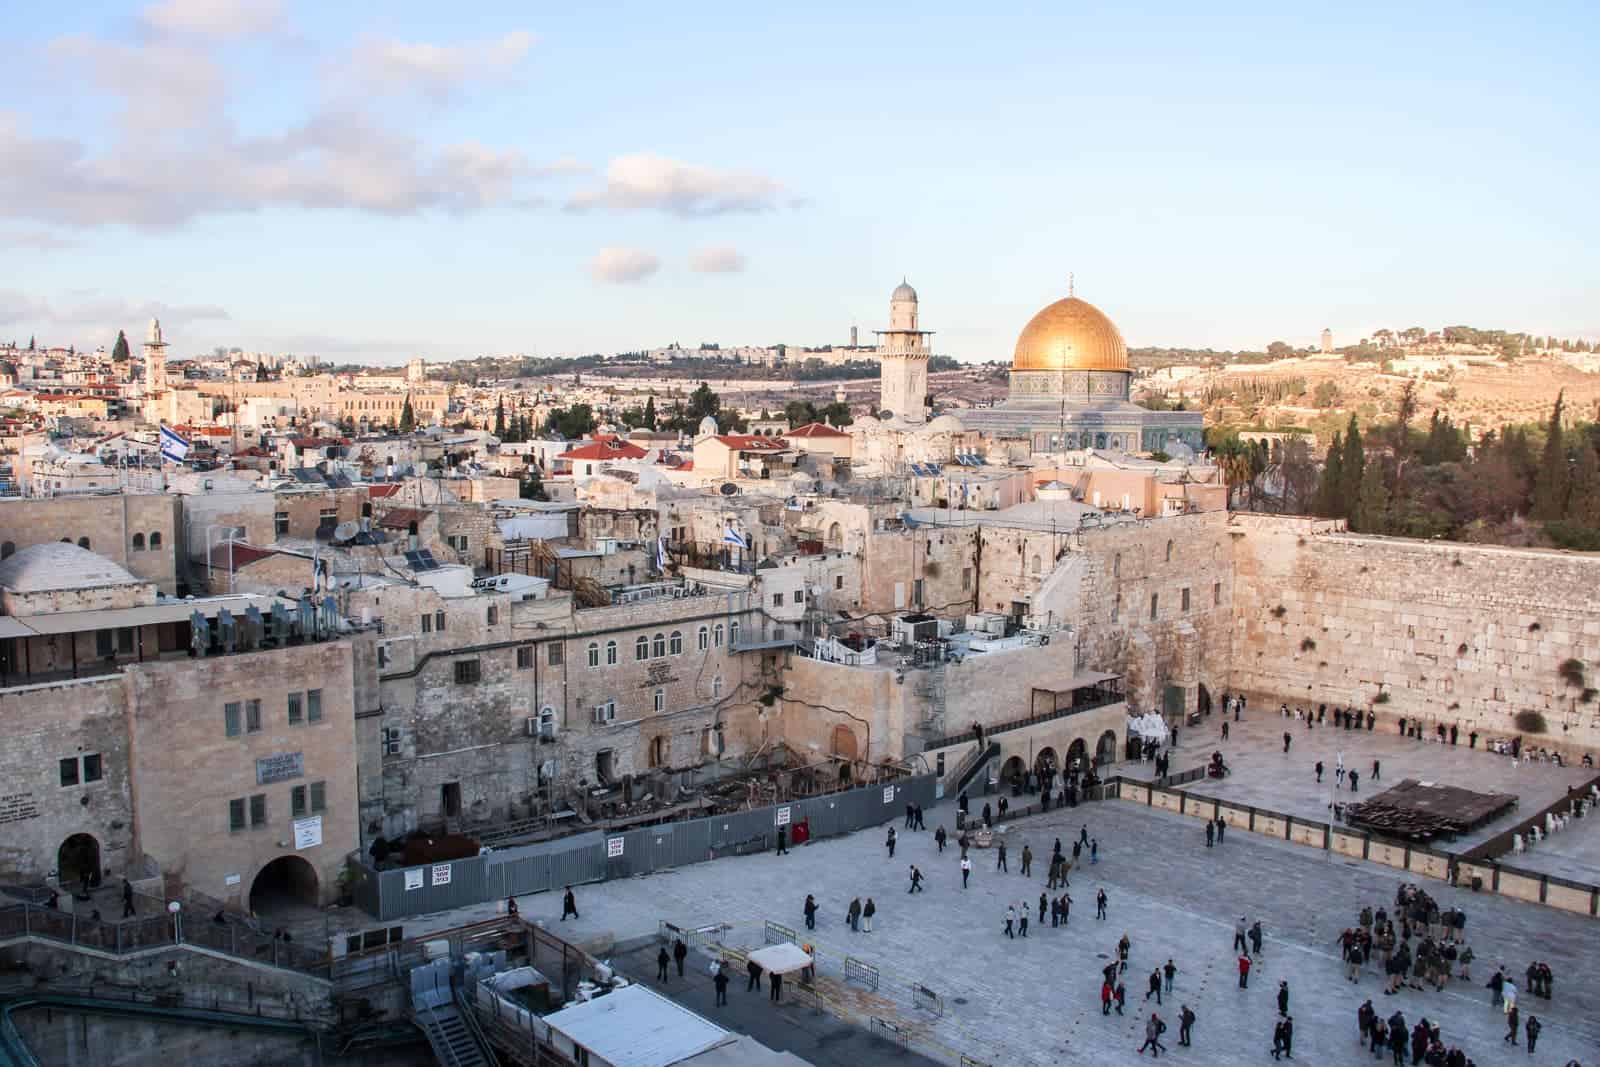 People gather in the The Western Wall Plaza in Jerusalem, surrounding by light orange-white stone walls and with a view to the golden dome of Temple Mount and a minaret.